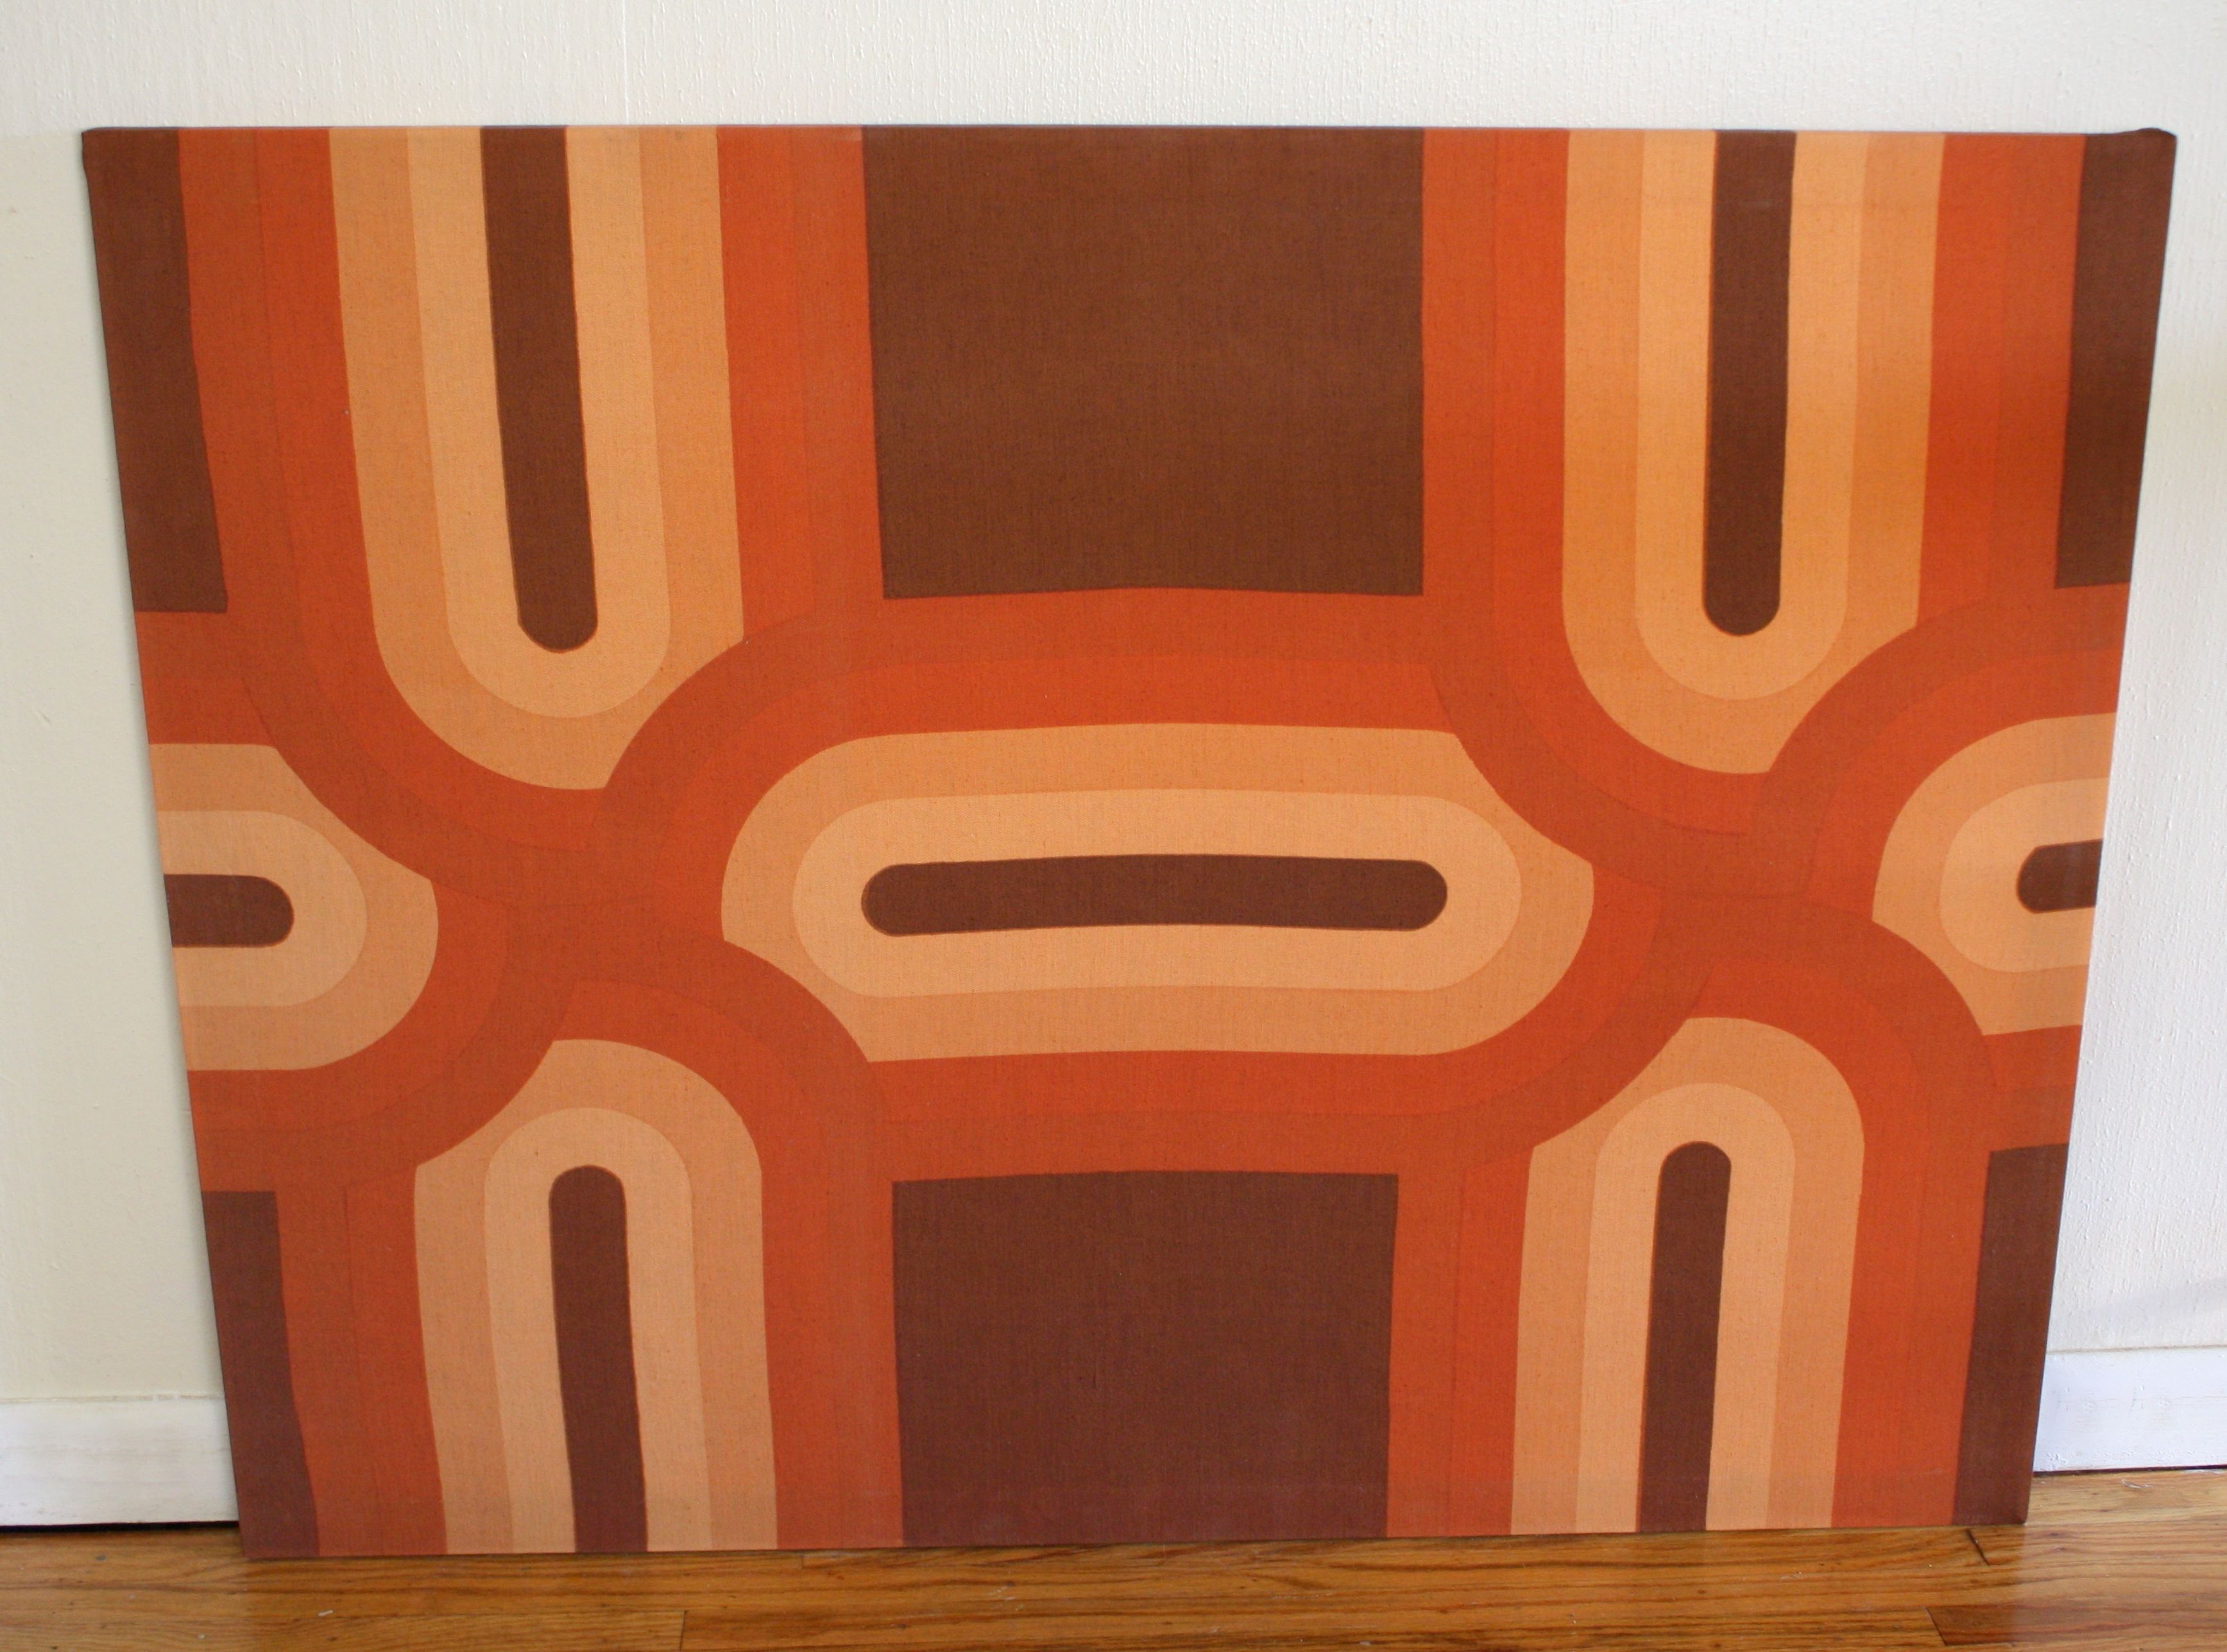 Preferred Stretched Fabric Wall Art Intended For Vintage Retro Fabric Wall Art (View 4 of 15)